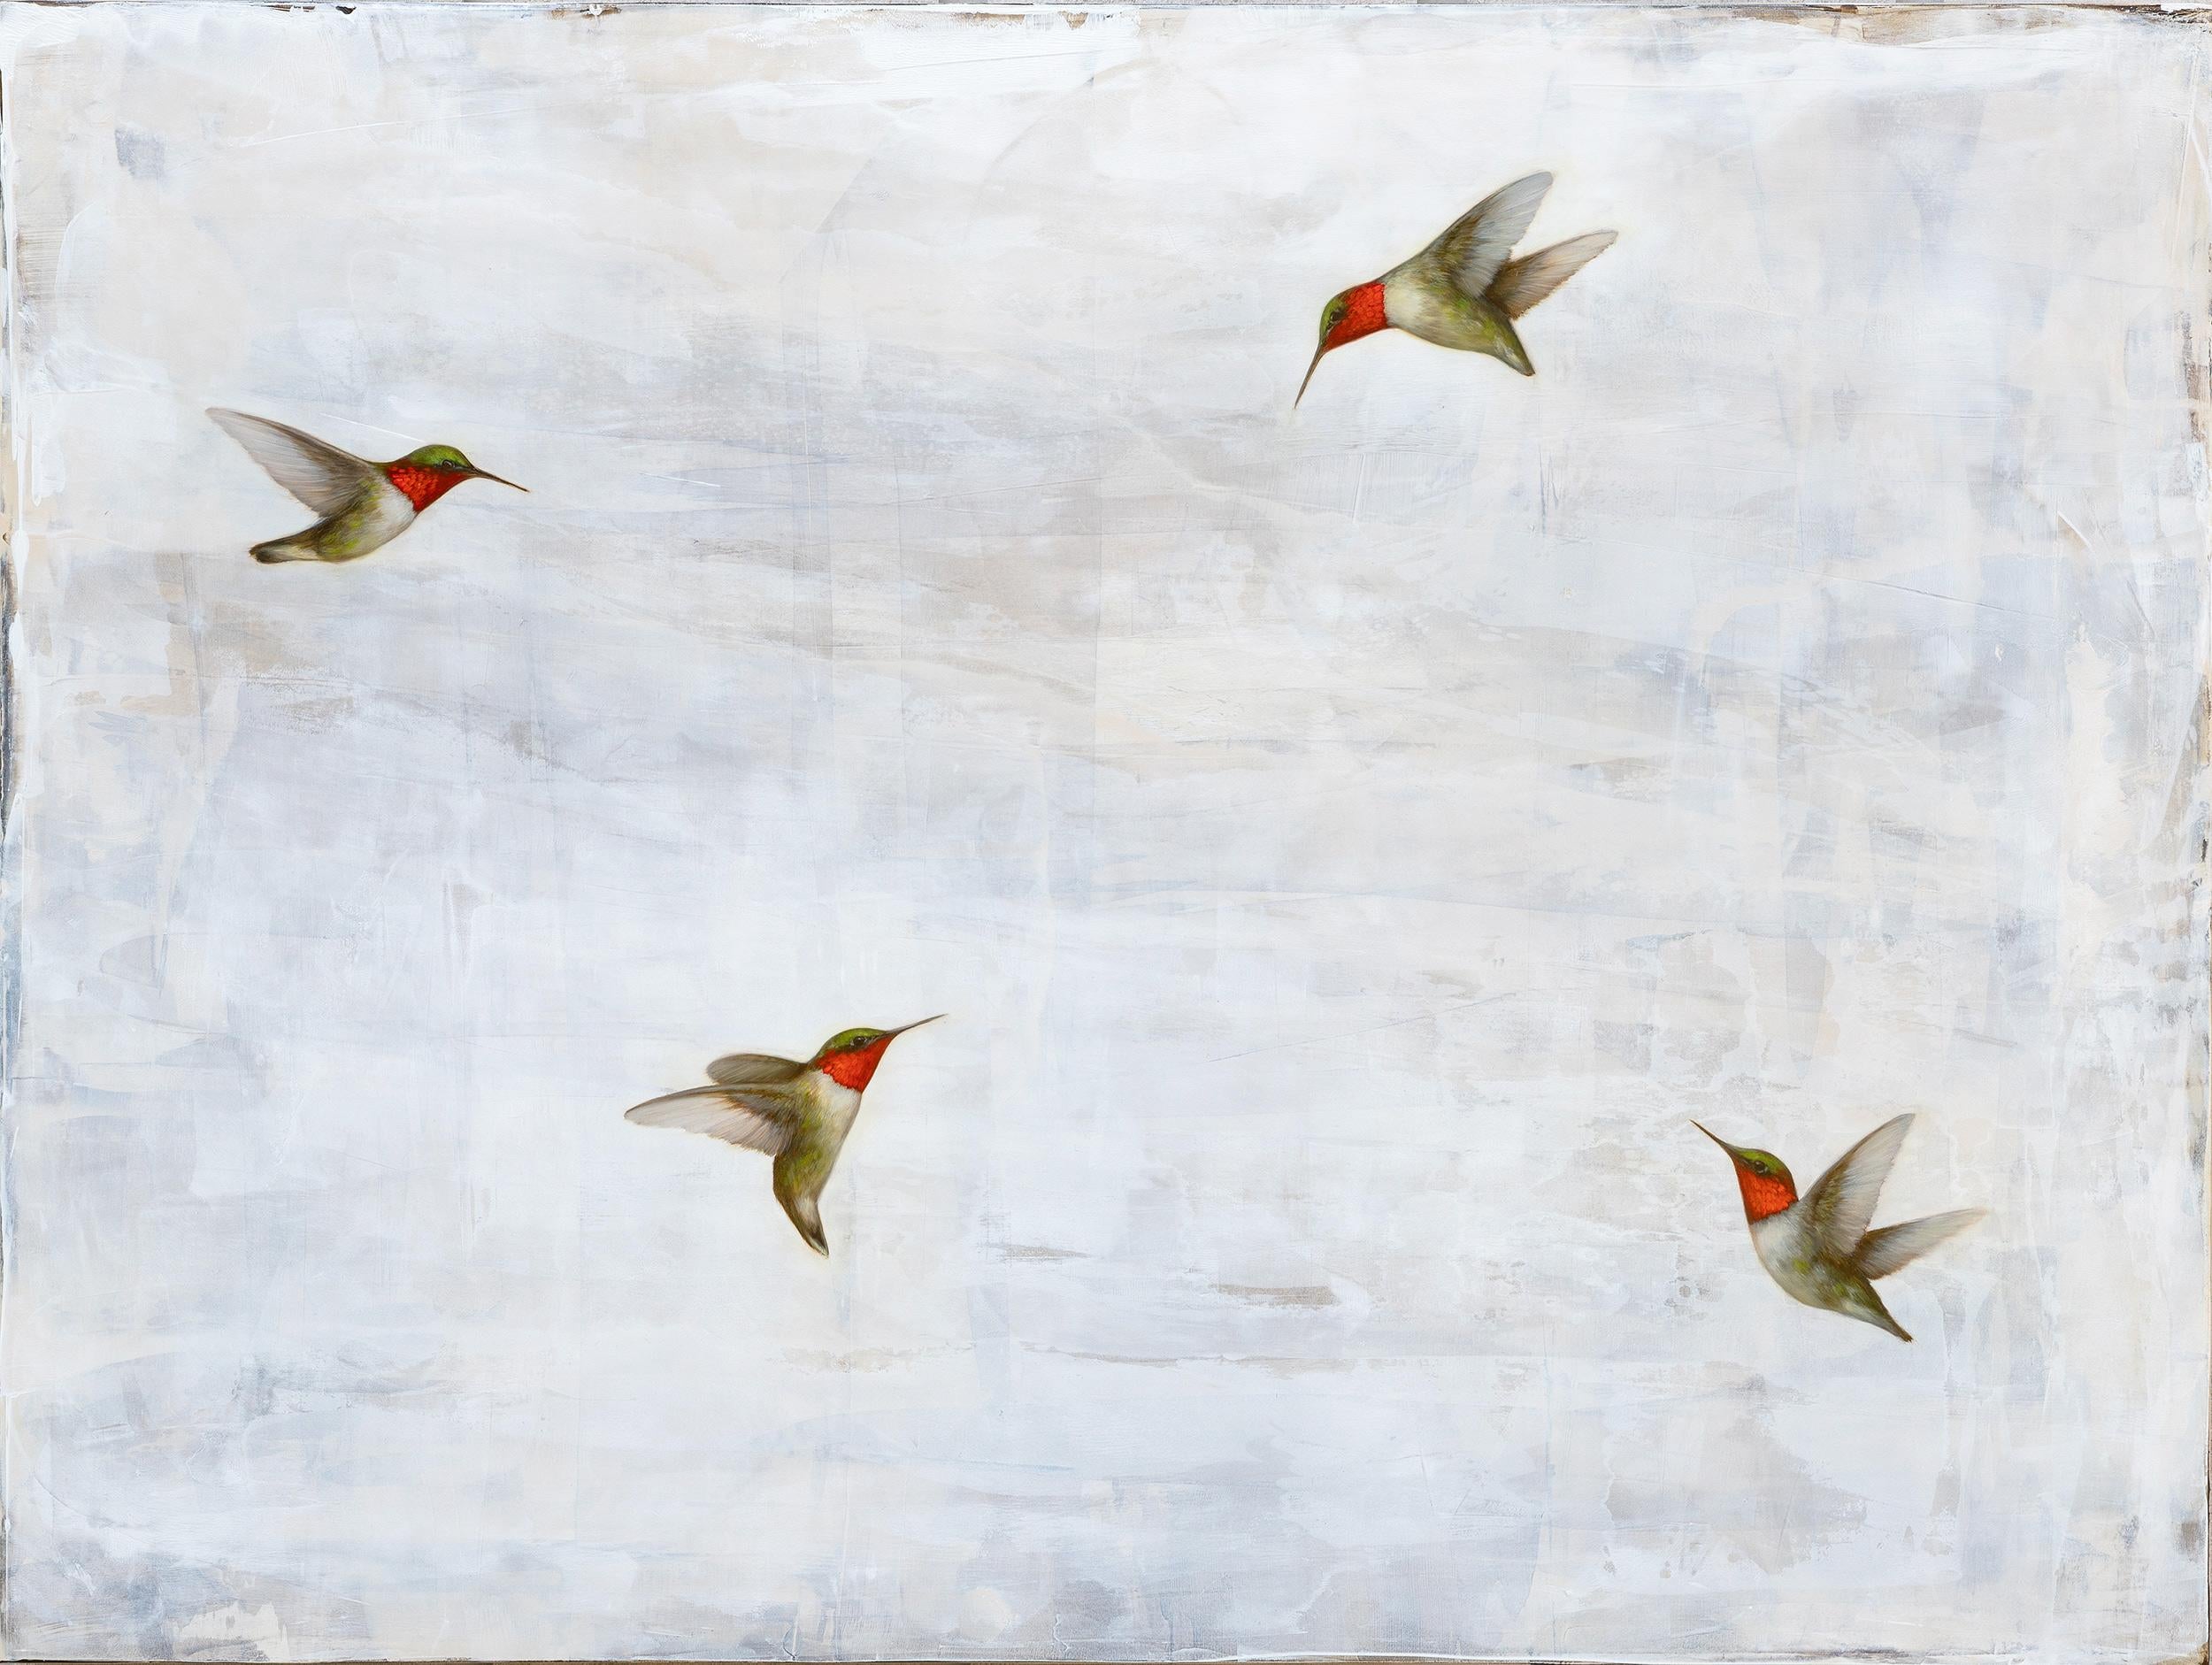 The Illusion of Time by Jessica Pisano, Contemporary Bird Painting on Board